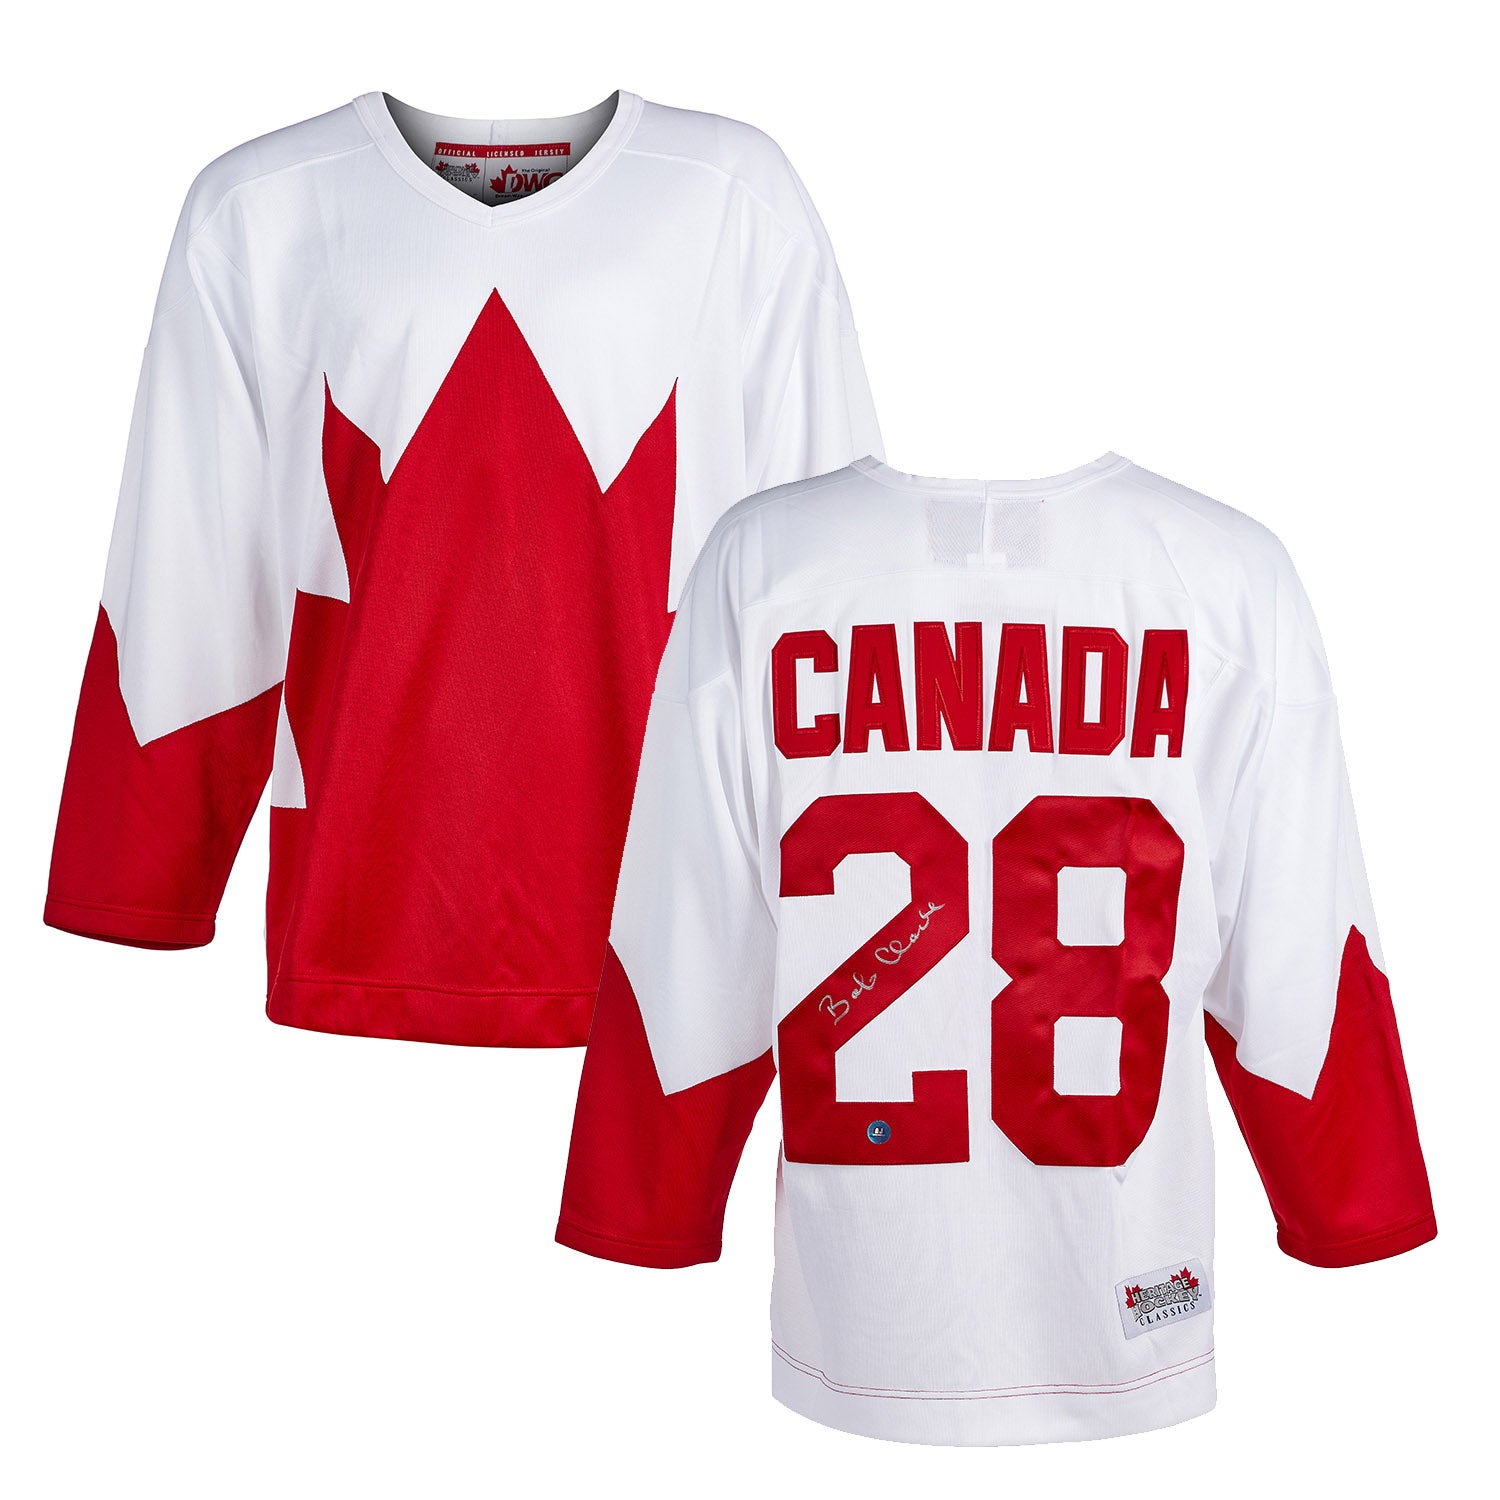 Bobby Clarke Team Canada Autographed 1972 Summit Series Jersey